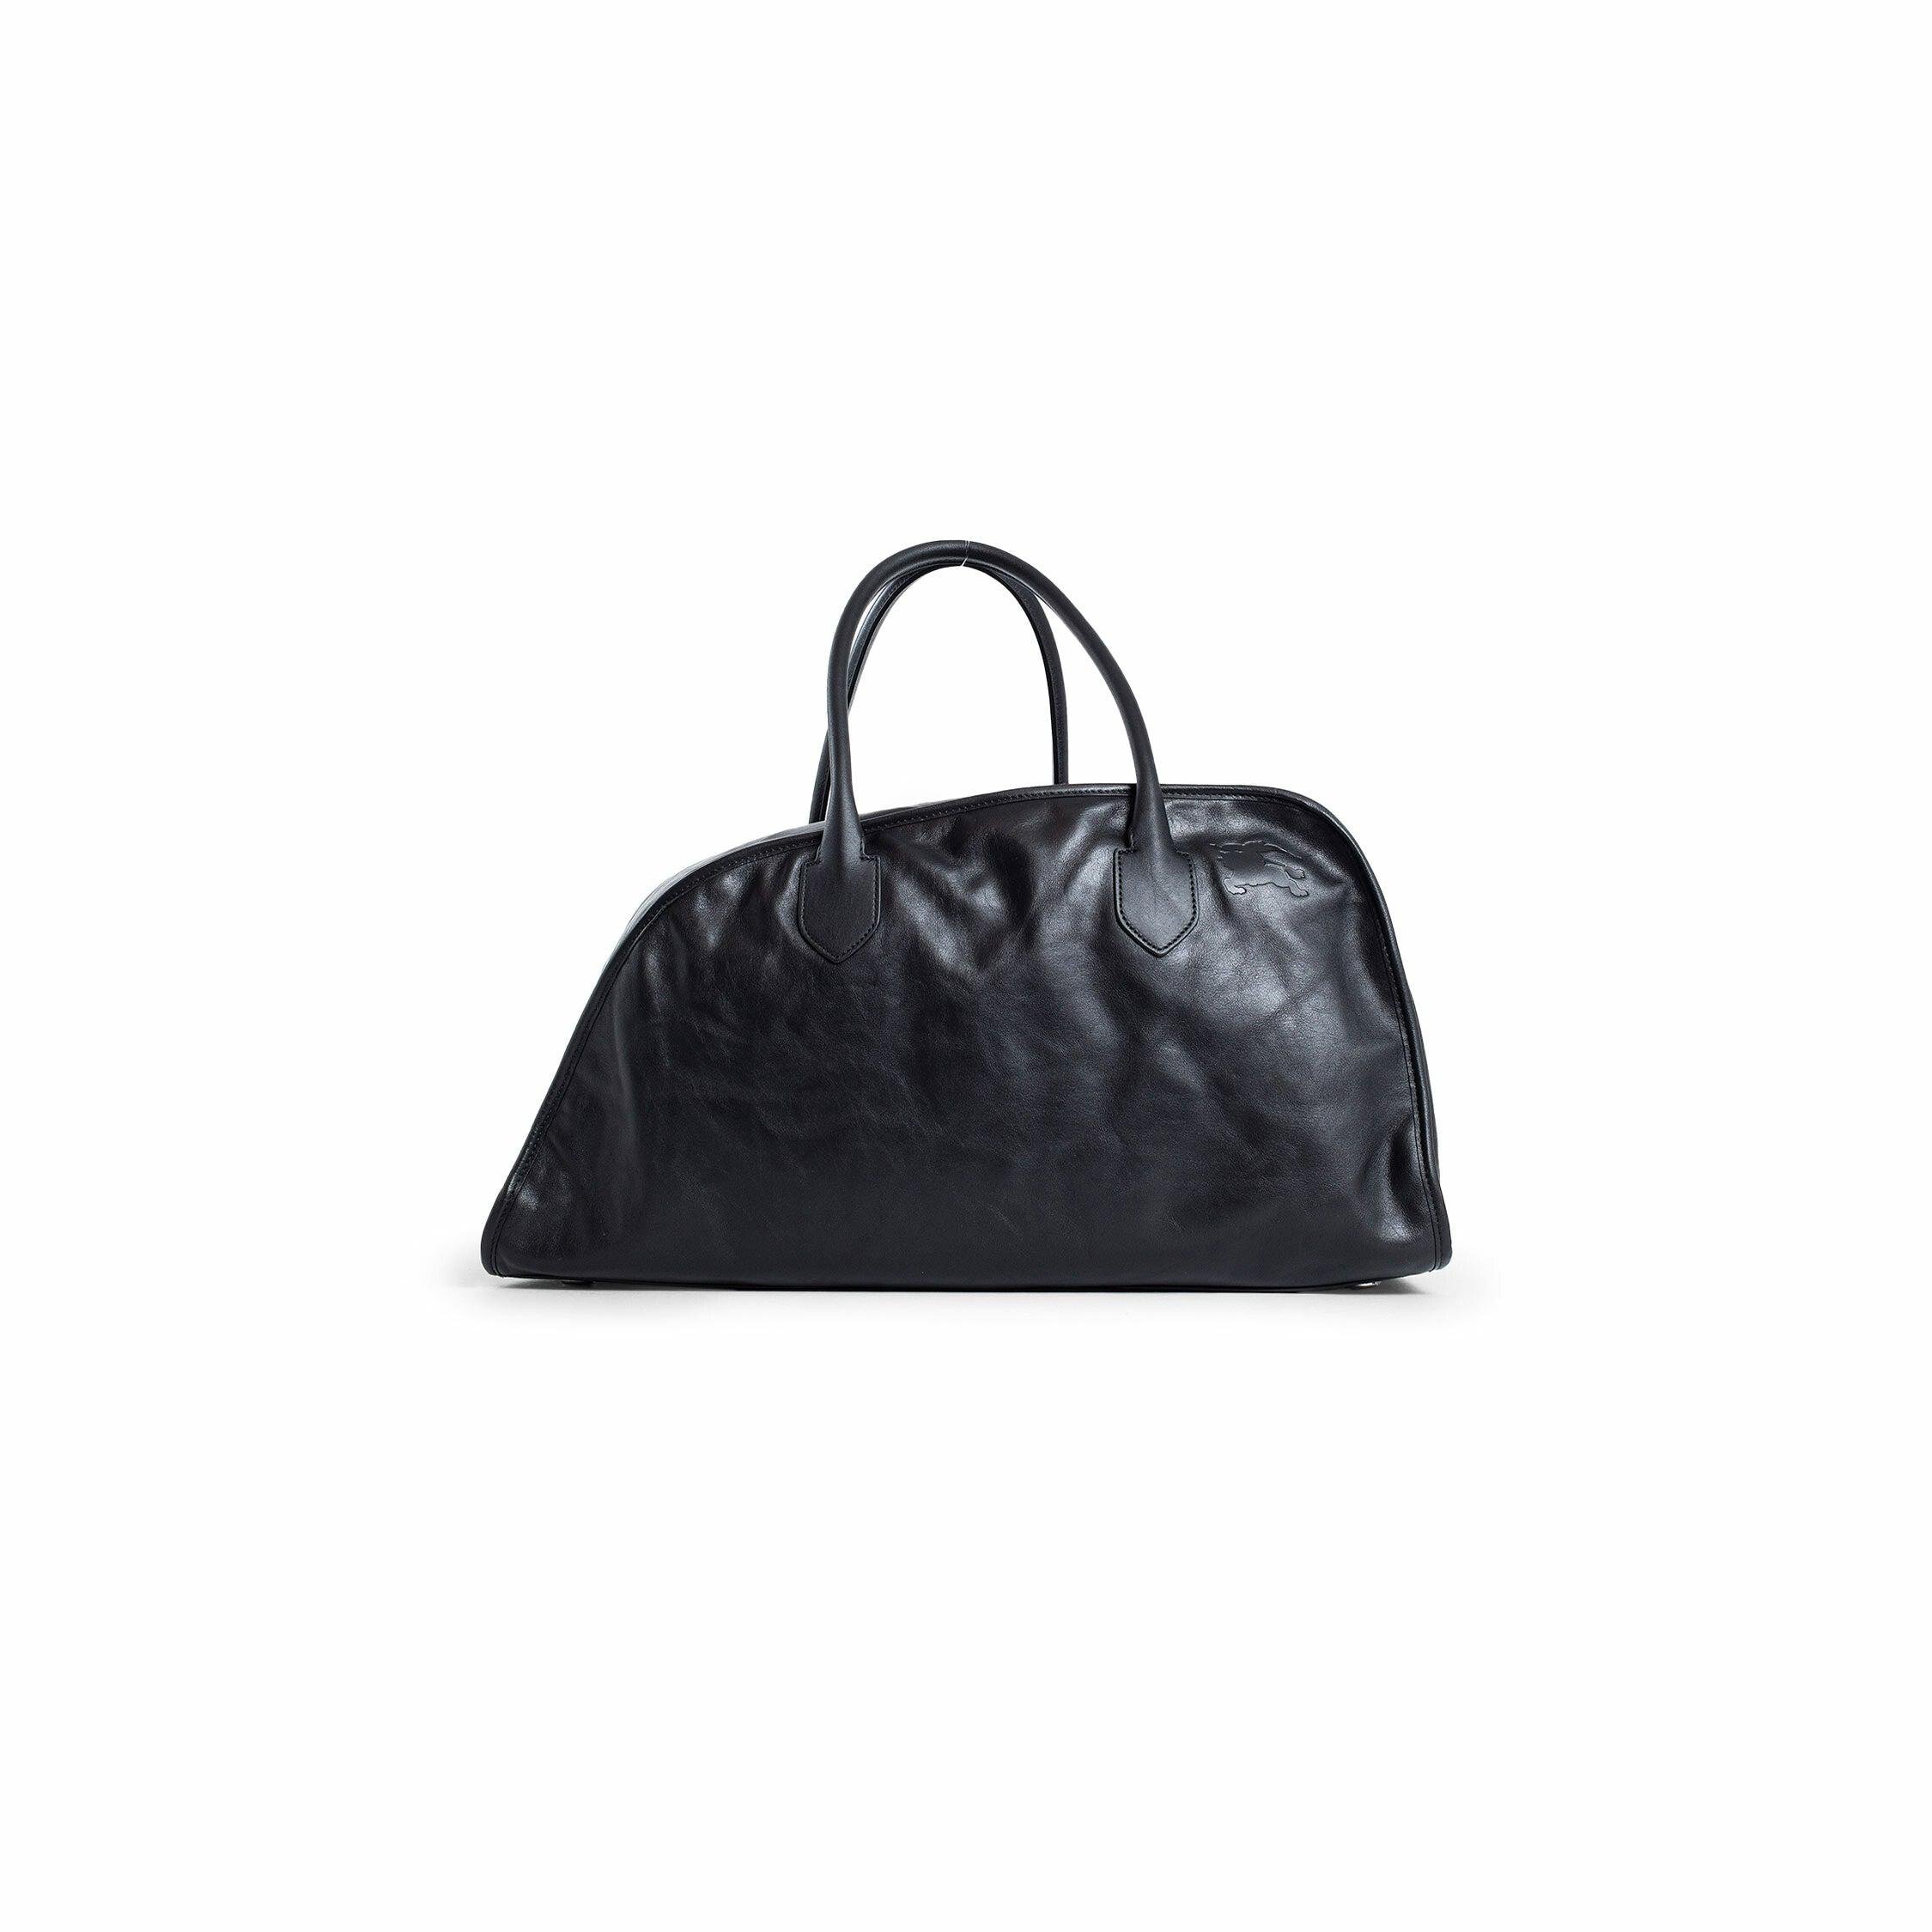 BURBERRY MAN BLACK TRAVEL BAGS by BURBERRY